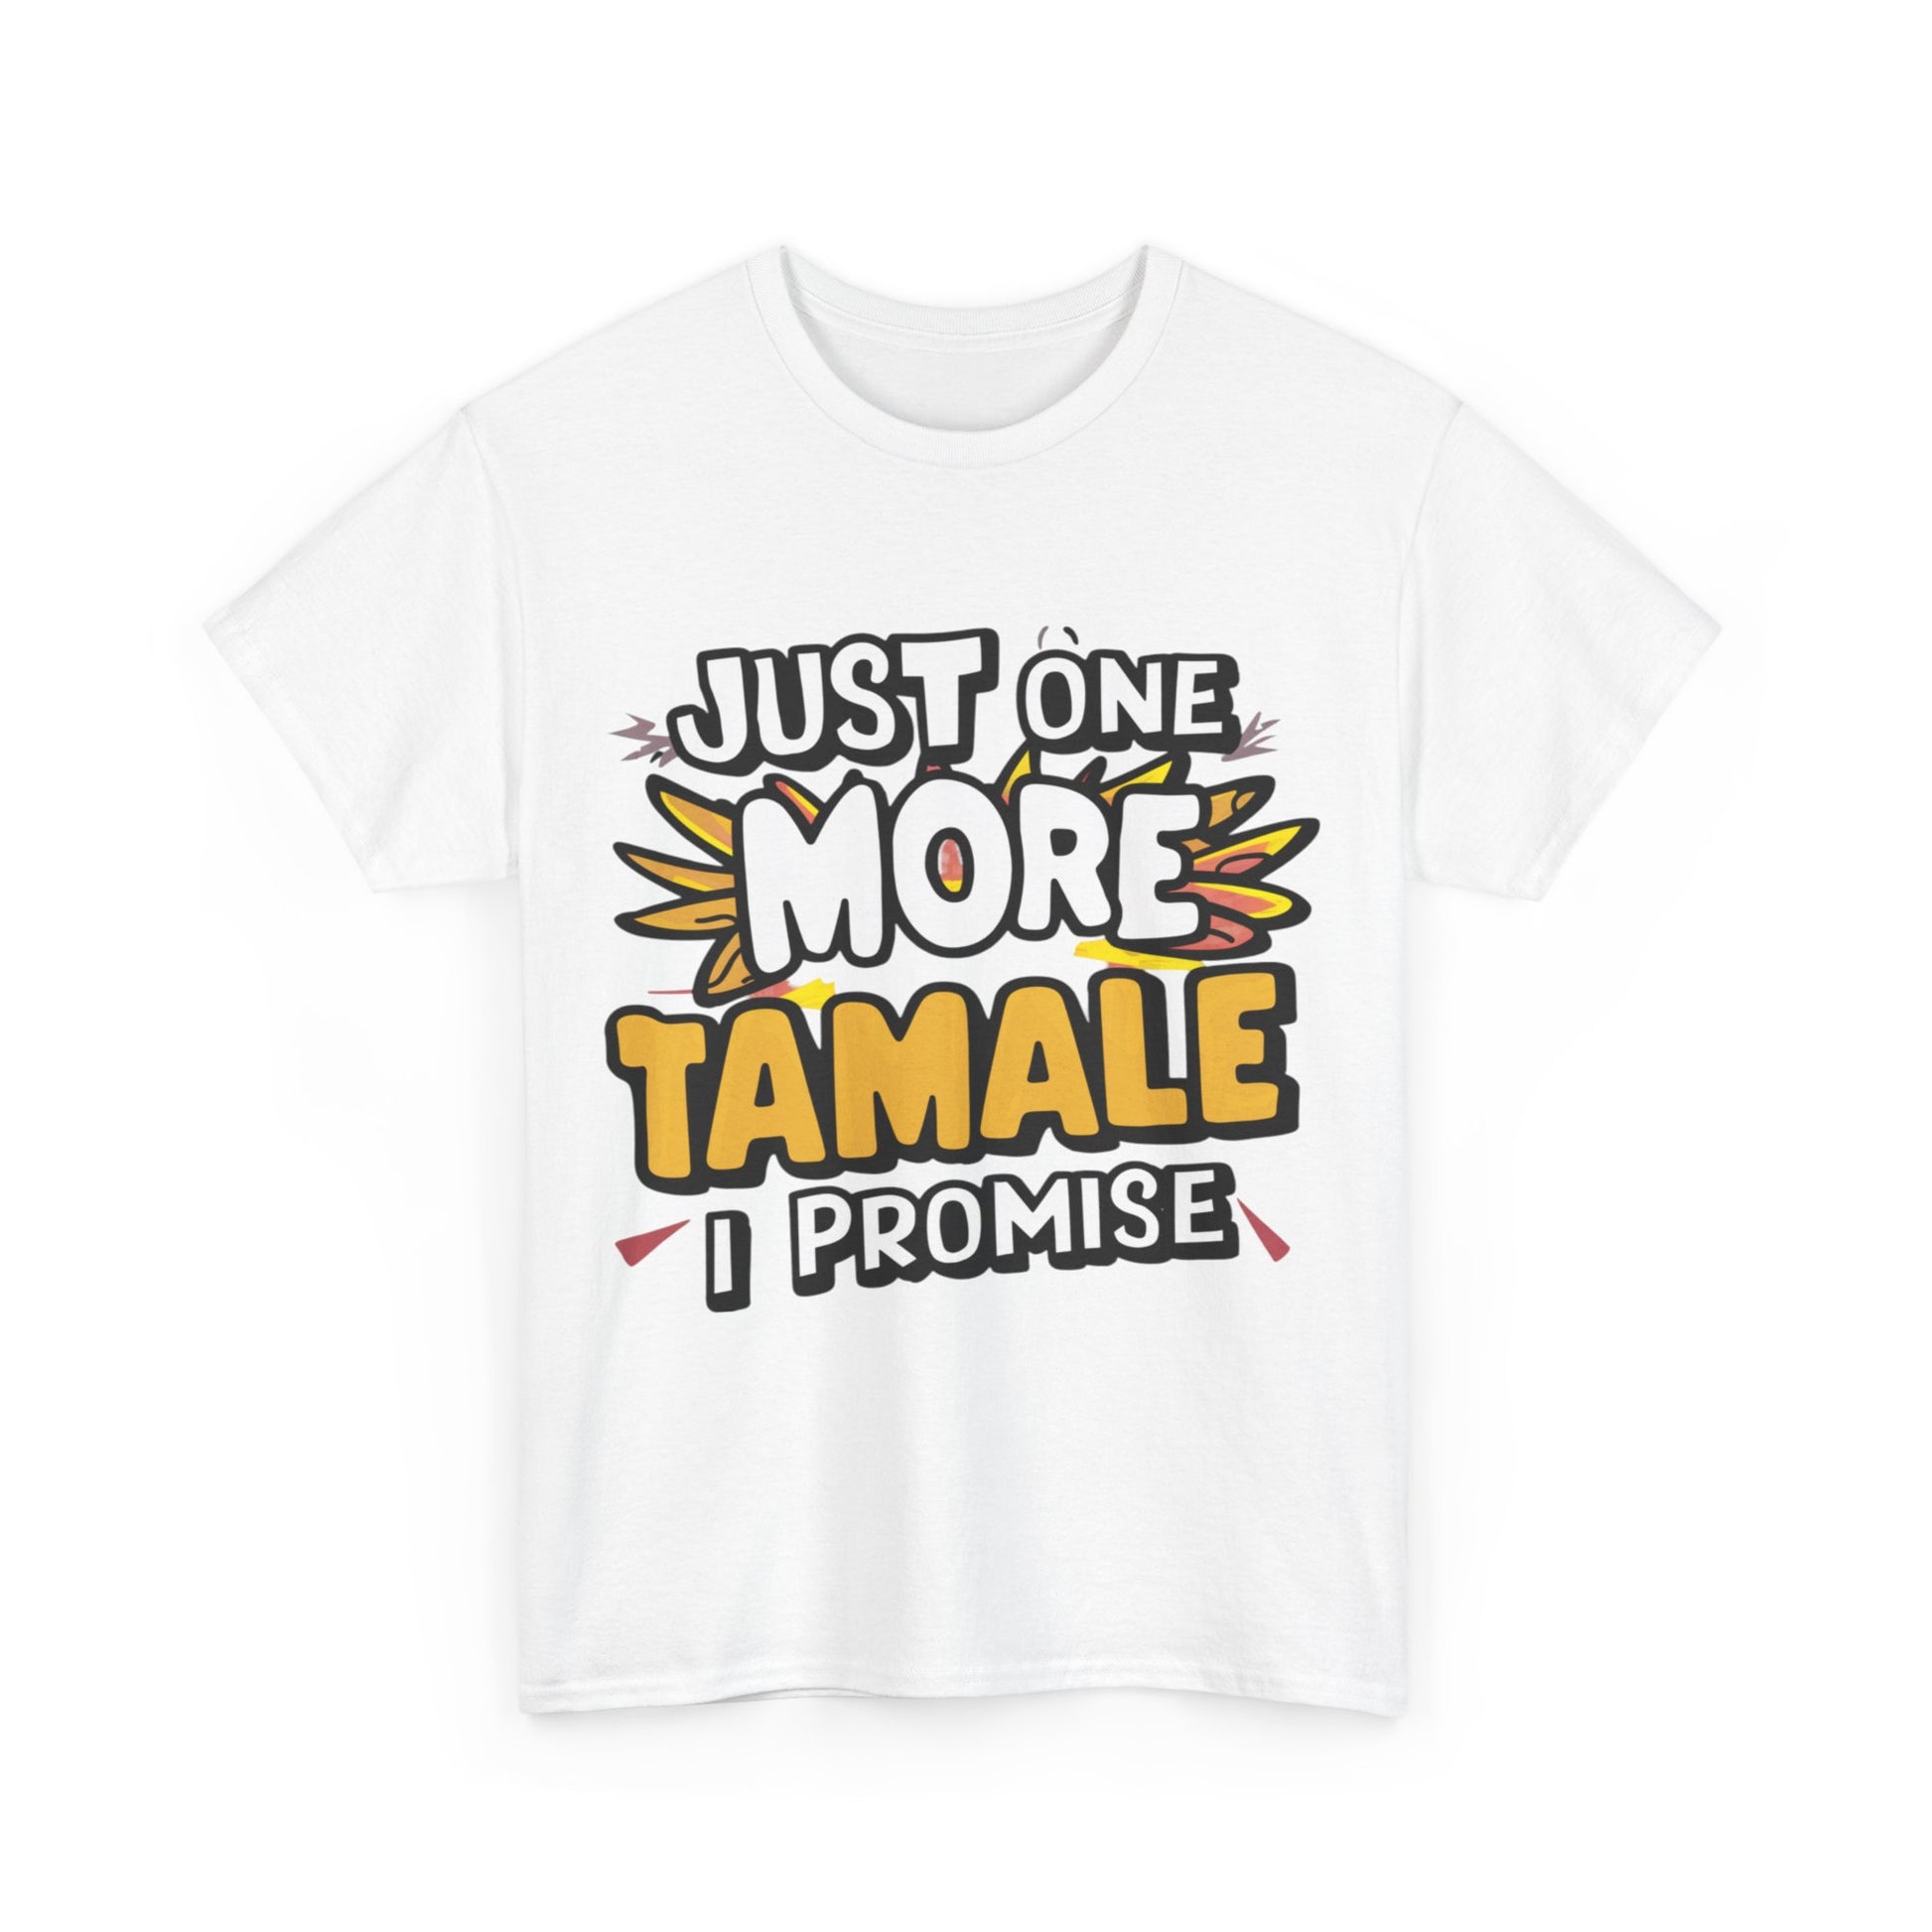 Just One More Tamale I Promise Mexican Food Graphic Unisex Heavy Cotton Tee Cotton Funny Humorous Graphic Soft Premium Unisex Men Women White T-shirt Birthday Gift-42